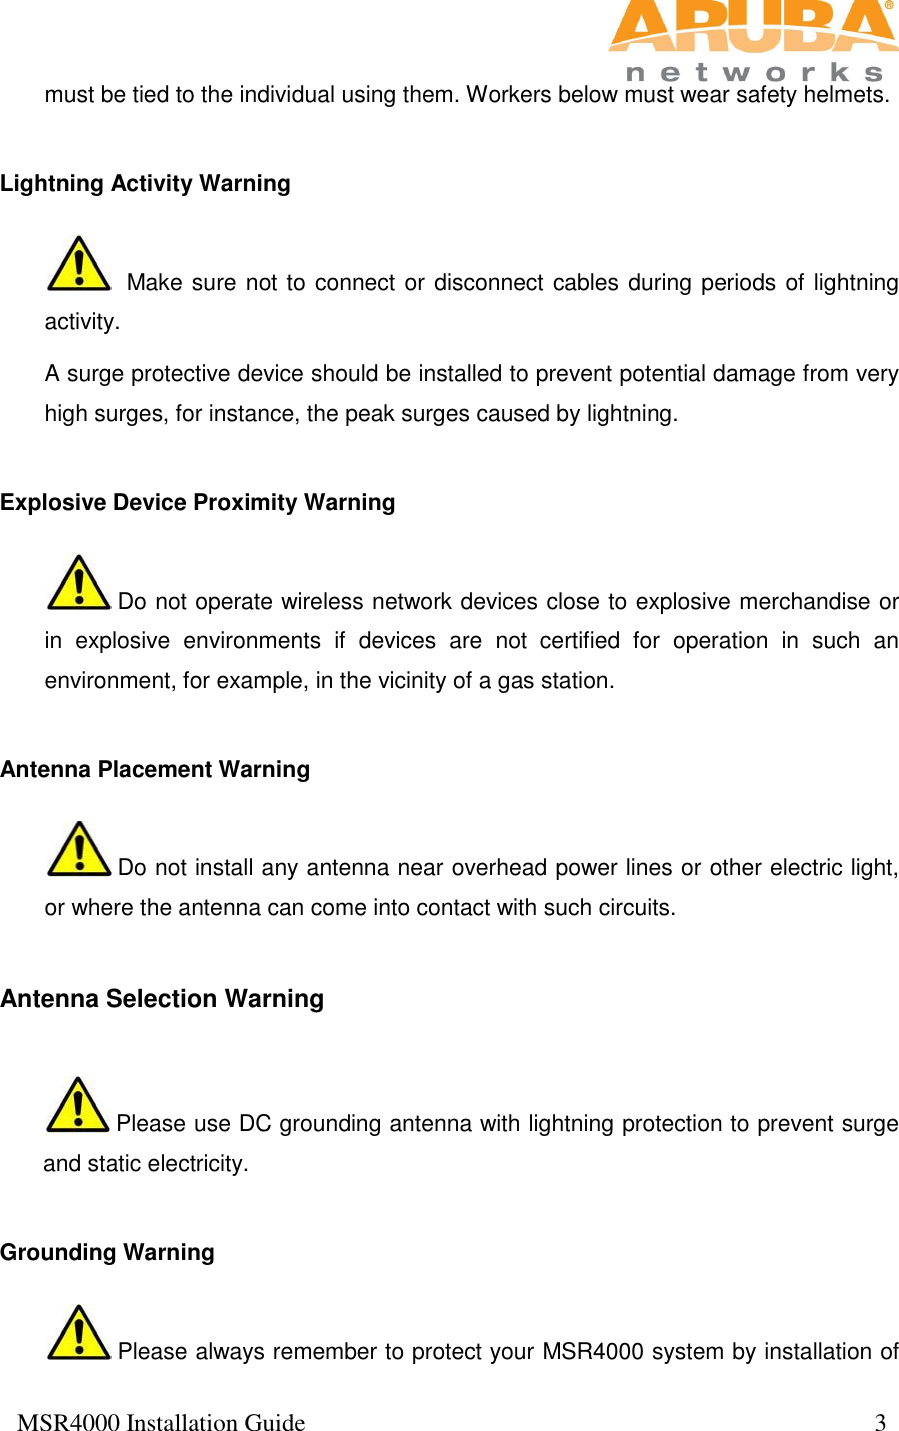  MSR4000 Installation Guide                                                                                           3  must be tied to the individual using them. Workers below must wear safety helmets.  Lightning Activity Warning   Make sure not to connect or disconnect cables during periods of lightning activity. A surge protective device should be installed to prevent potential damage from very high surges, for instance, the peak surges caused by lightning. Explosive Device Proximity Warning  Do not operate wireless network devices close to explosive merchandise or in  explosive  environments  if  devices  are  not  certified  for  operation  in  such  an environment, for example, in the vicinity of a gas station.   Antenna Placement Warning  Do not install any antenna near overhead power lines or other electric light, or where the antenna can come into contact with such circuits.  Antenna Selection Warning  Please use DC grounding antenna with lightning protection to prevent surge and static electricity.   Grounding Warning  Please always remember to protect your MSR4000 system by installation of 